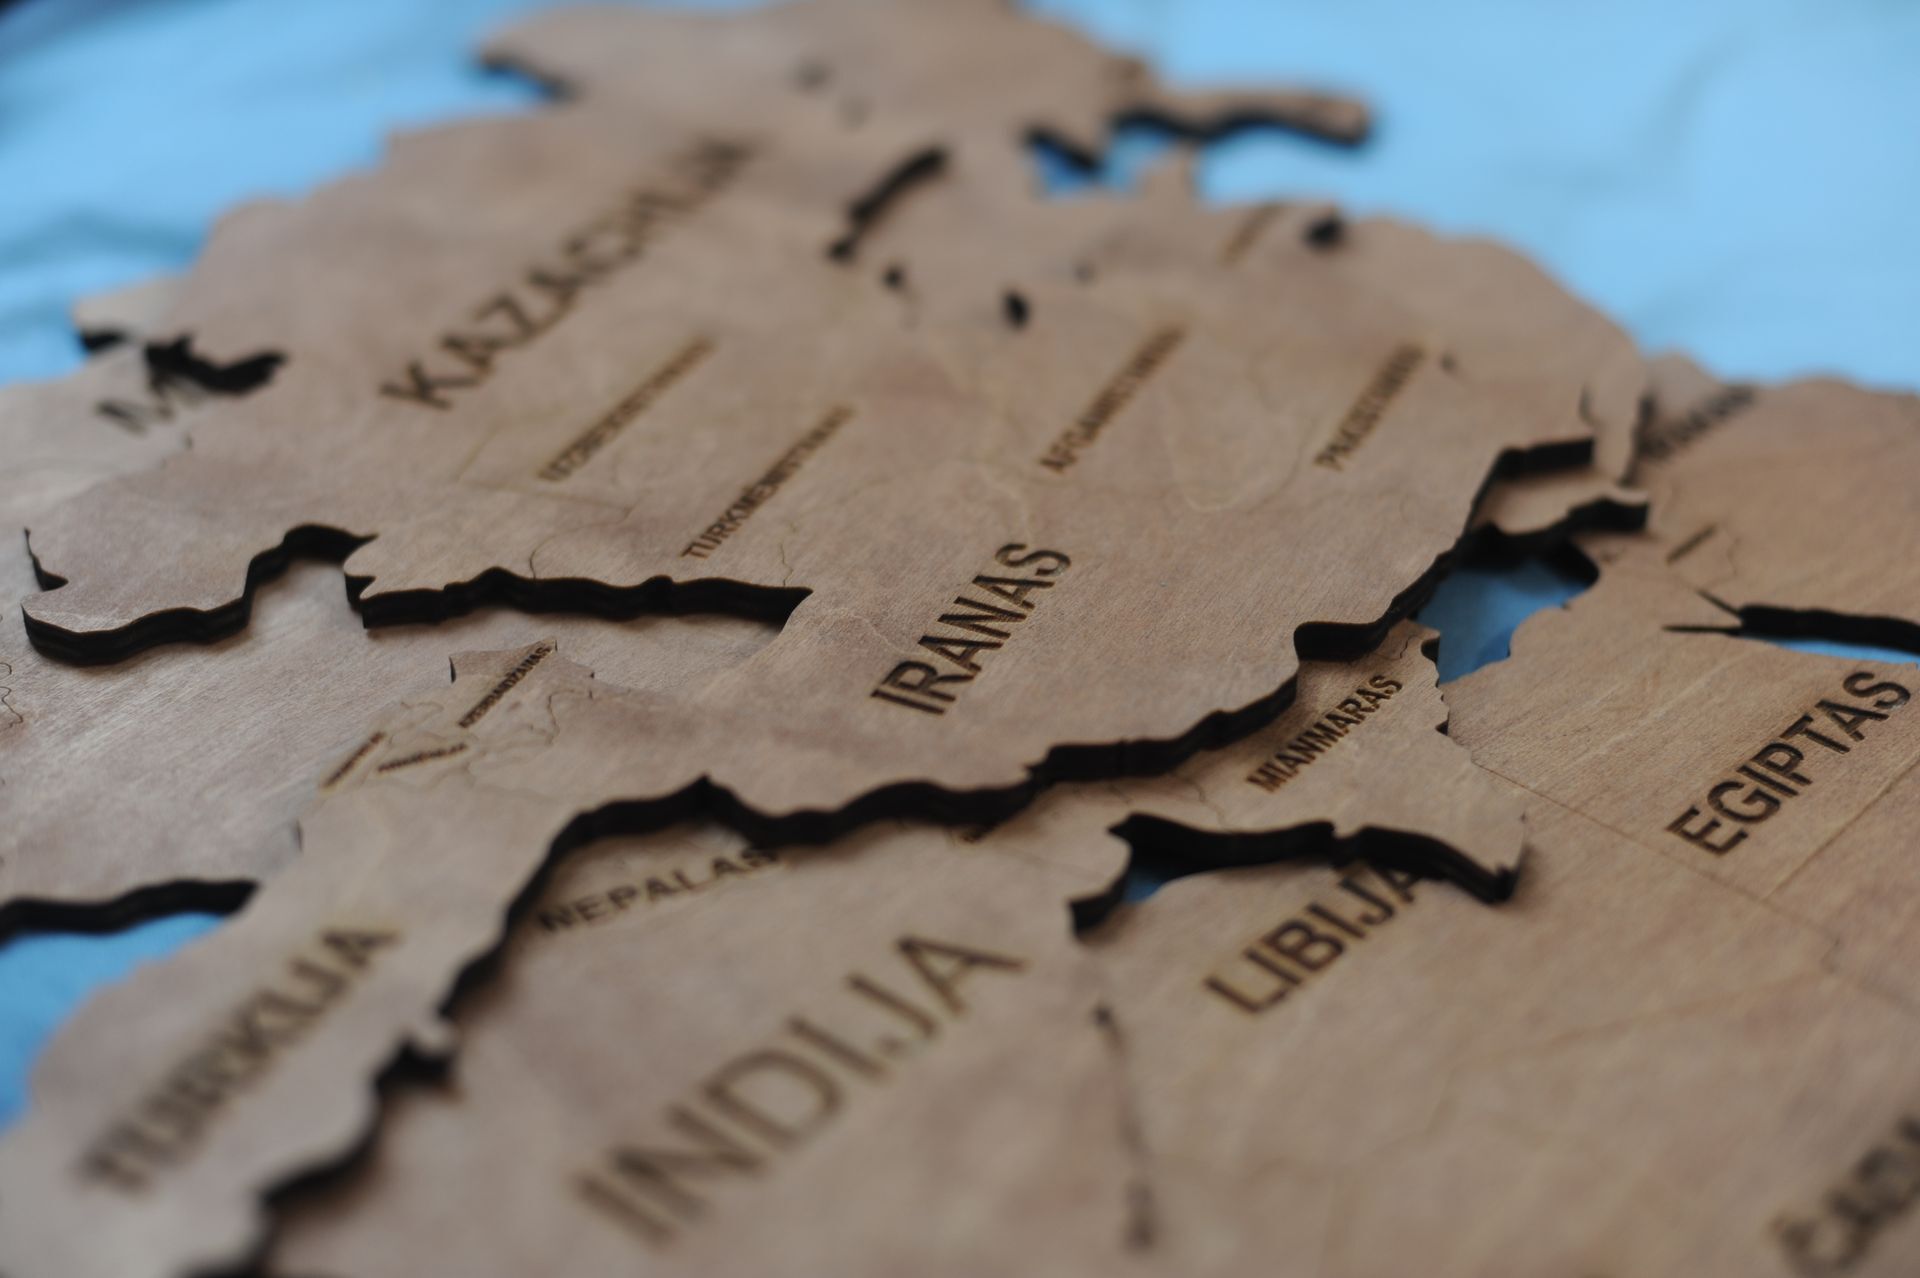 ️Country Wooden World Map Walnut ?